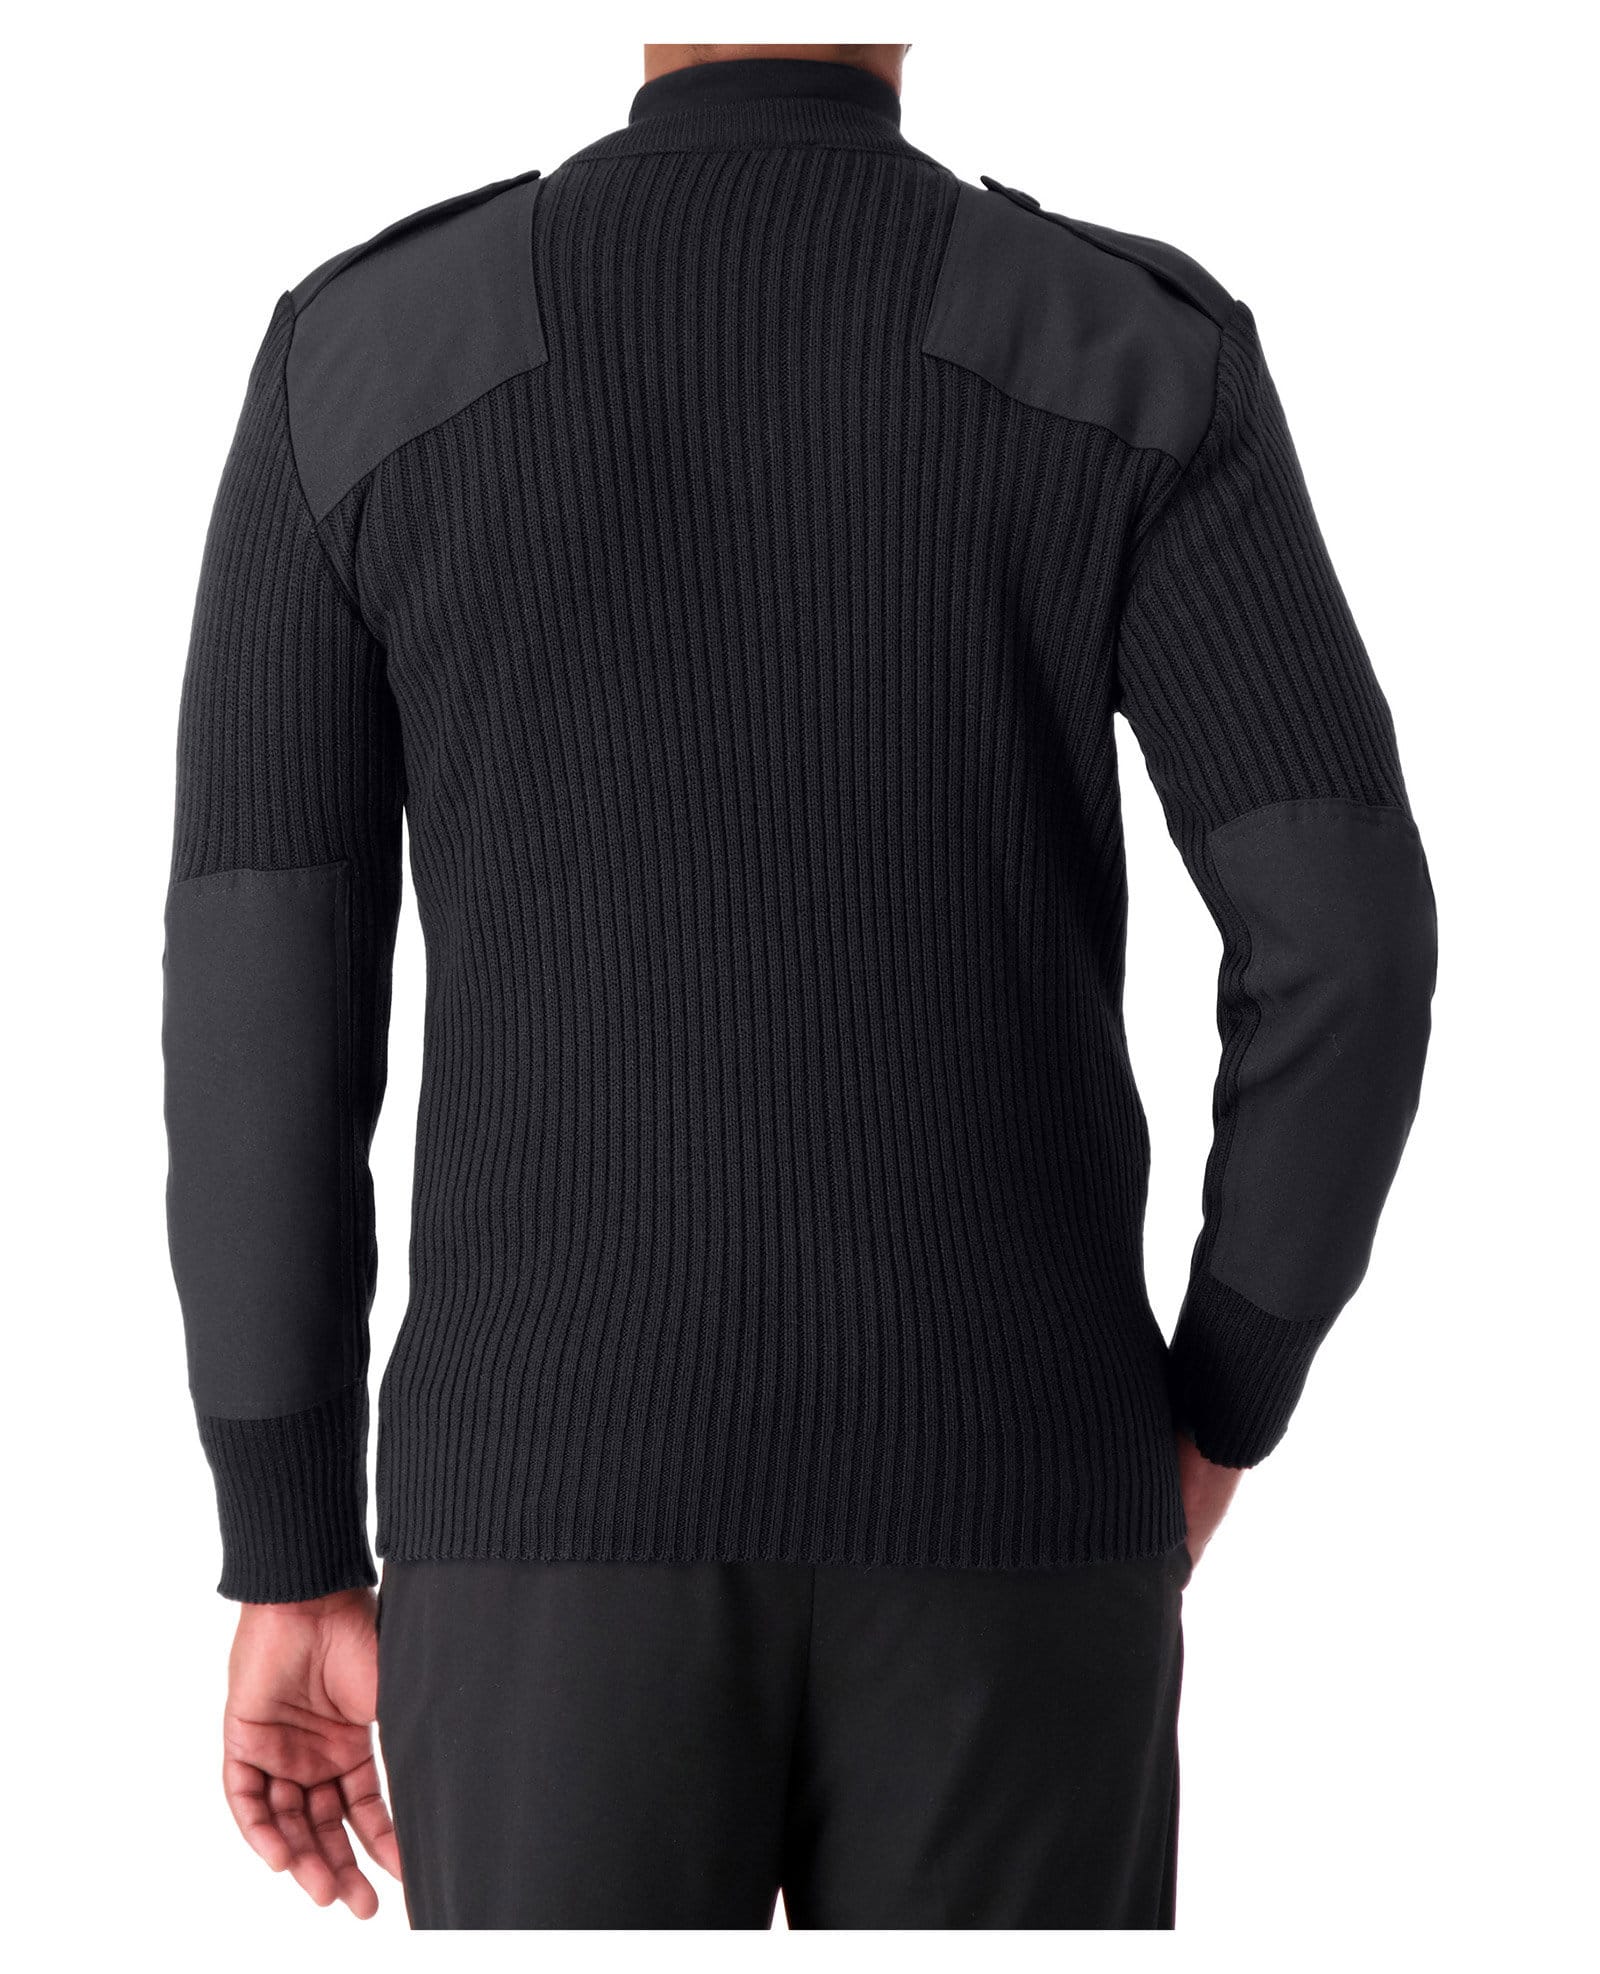 back of thick black v-neck knit sweater with shoulder and elbow patches